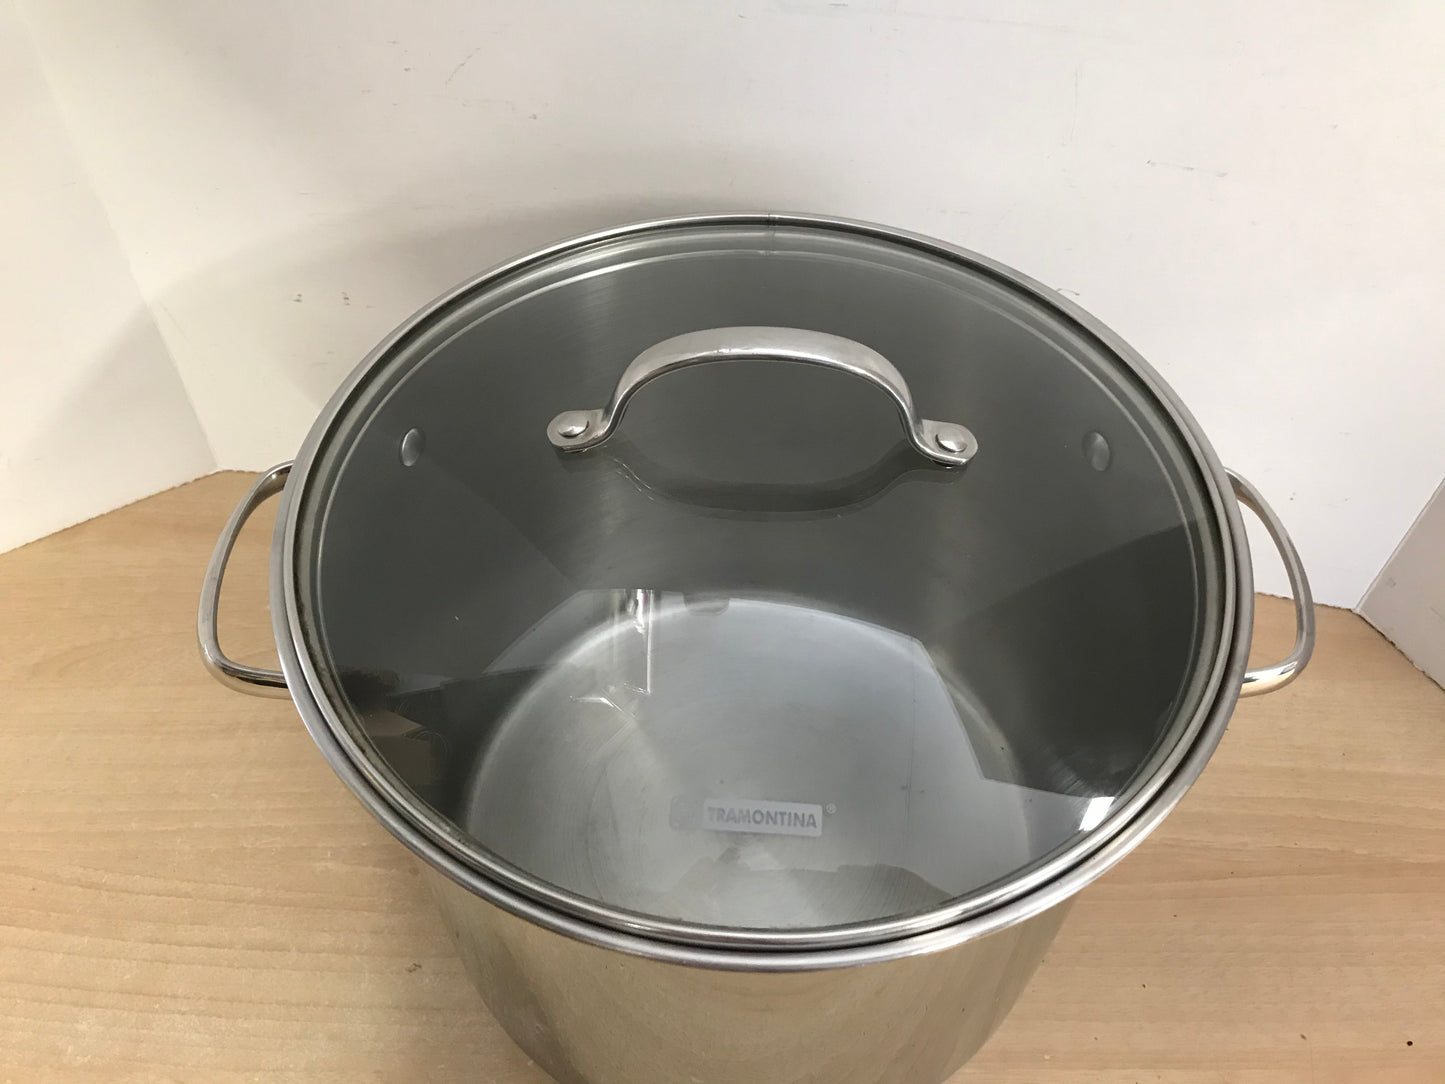 Cottage and Home Tramontina Professional 12 Quart 18-10 Stainless Steel Stock Pot With Lid Excellent